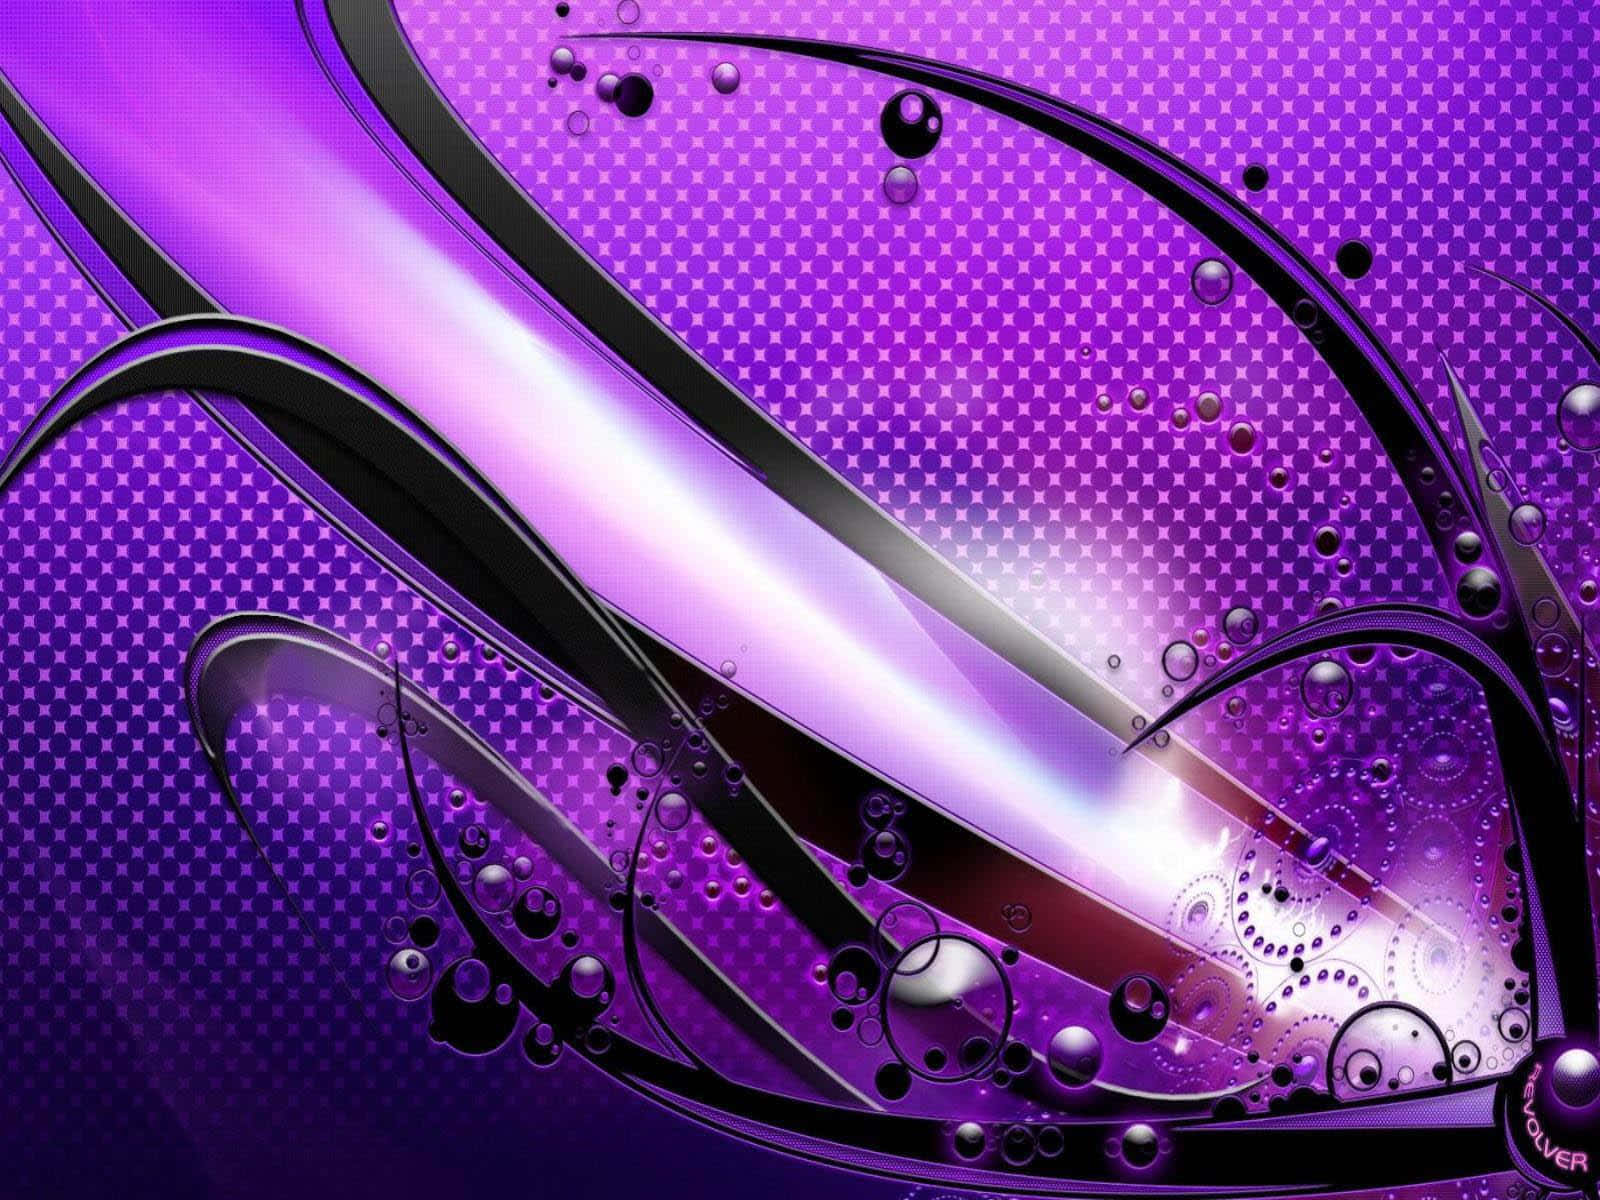 Purple Abstract Background Images  Free Download on Freepik